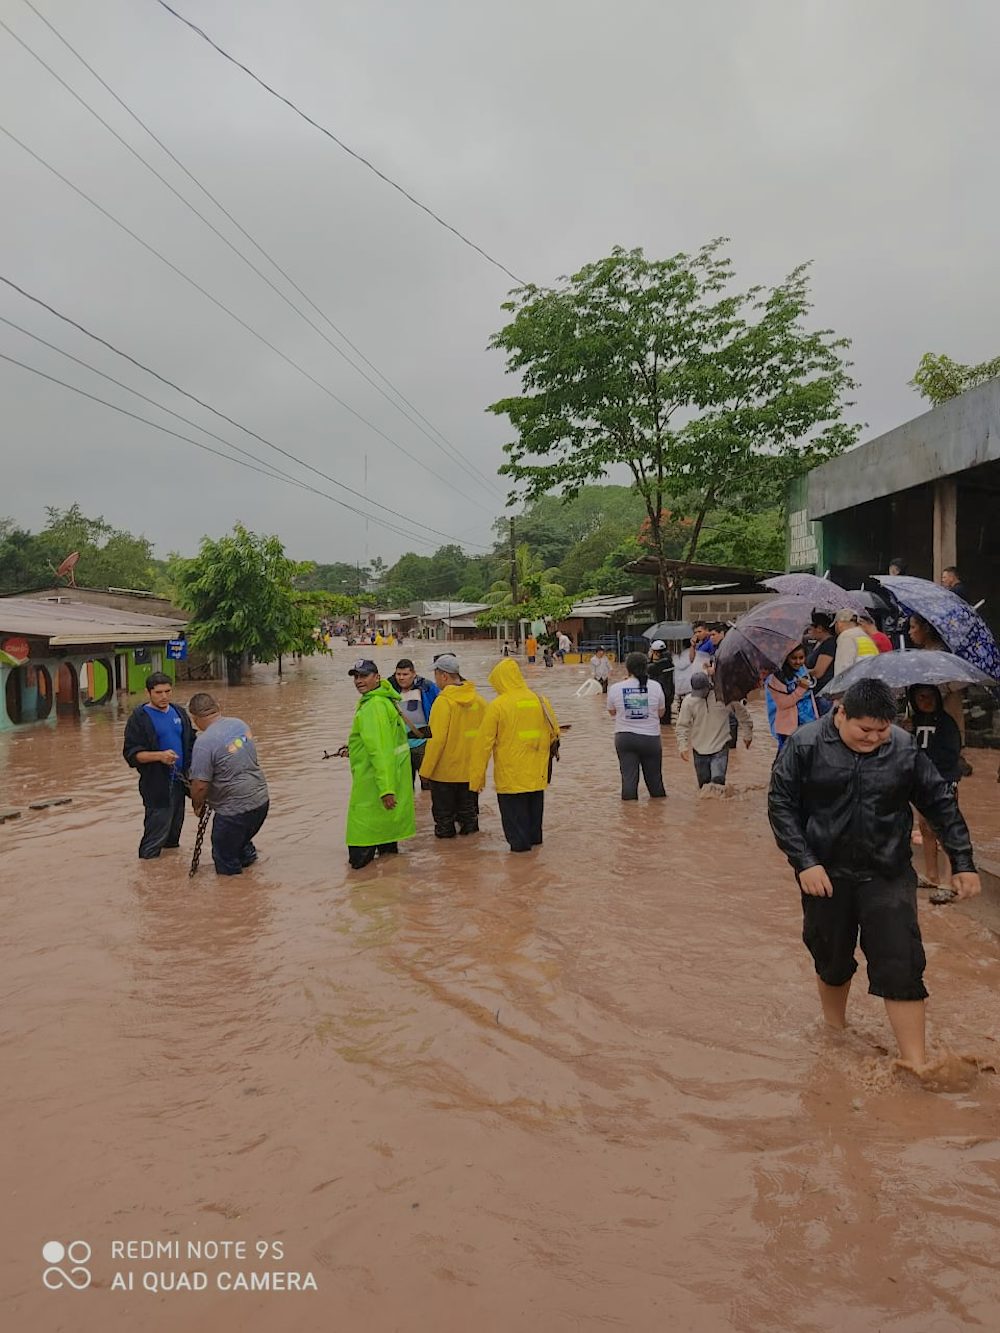 Residents of Waslala, a town and municipality in Nicaragua's North Caribbean Coast Autonomous Region, wade through flood waters caused by Hurricane Iota.Photo by Yaribell Rocha, Heifer Nicaragua Program and Communication Assistant